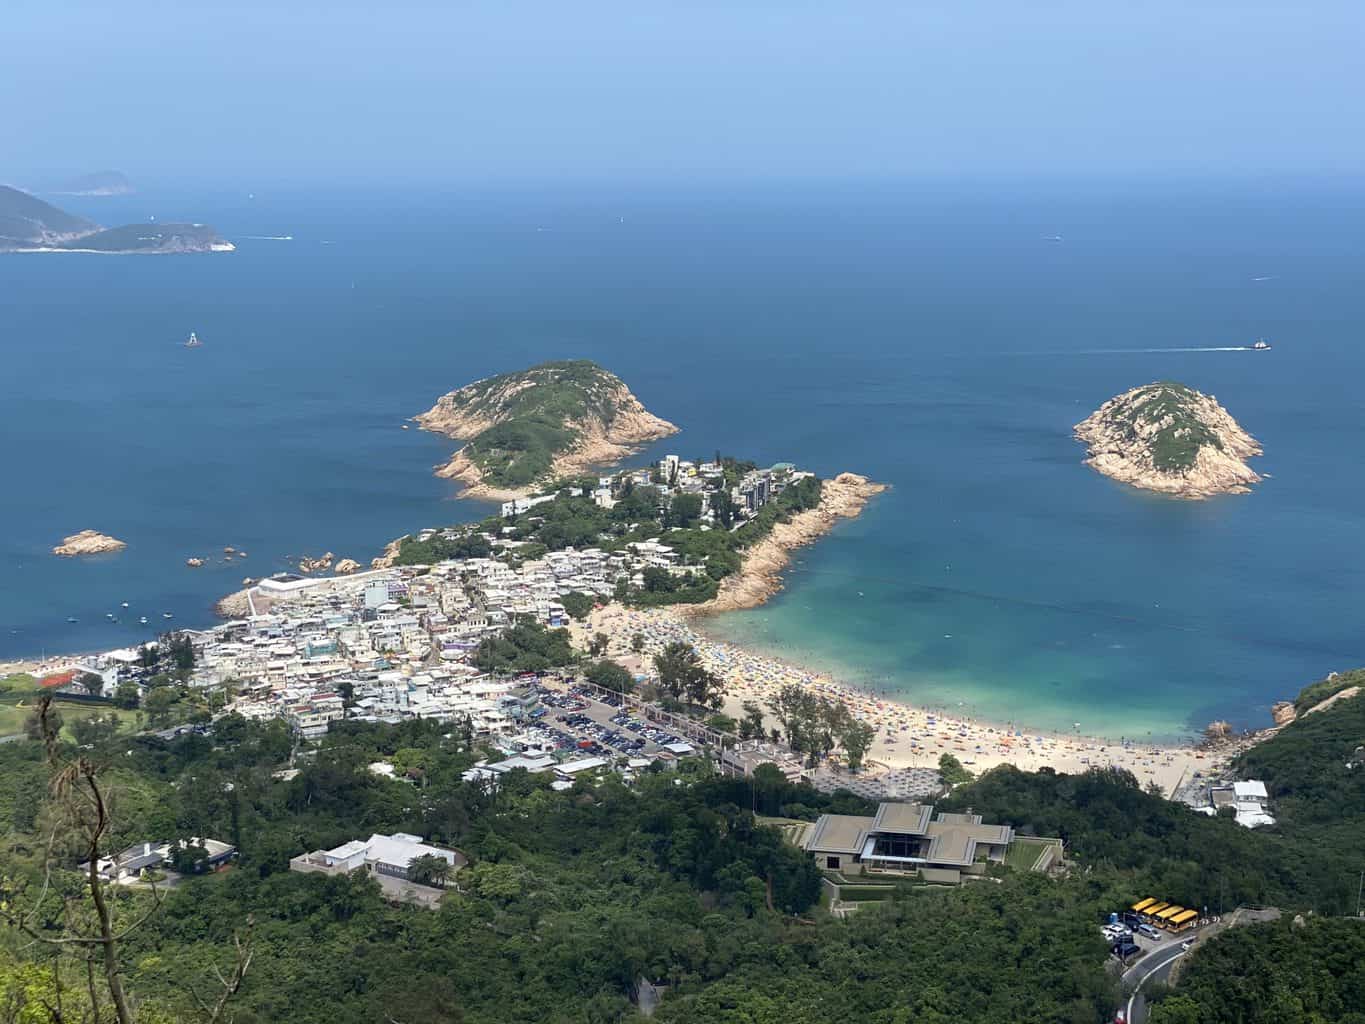 Shek-O Village on a very clear day with deep blue water